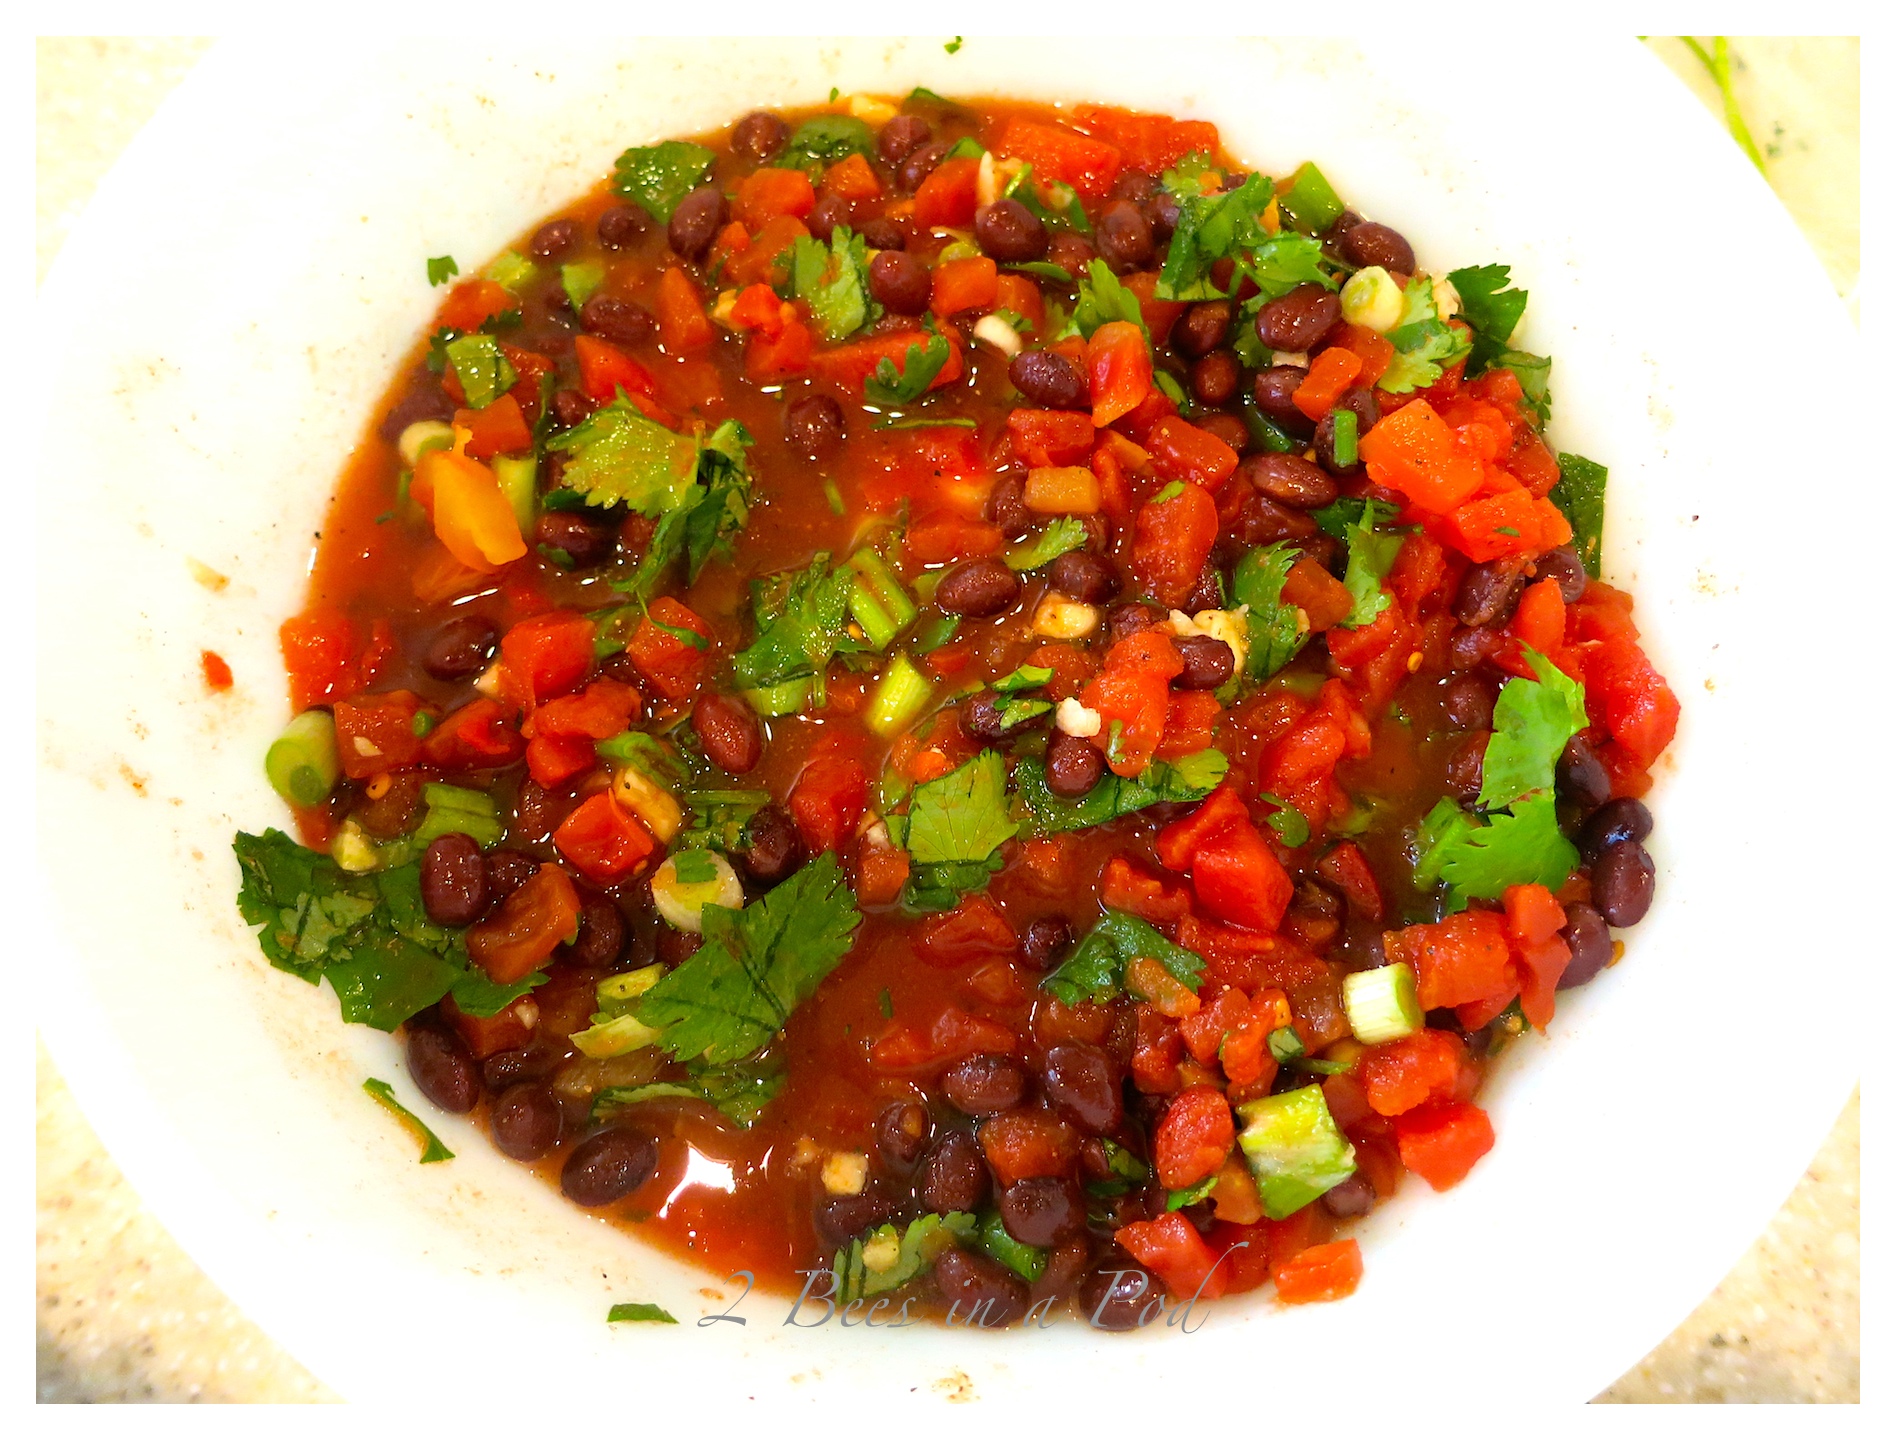 Skinny Super Bowl Snack - Black Bean Salsa. Packed with flavor and very healthy!